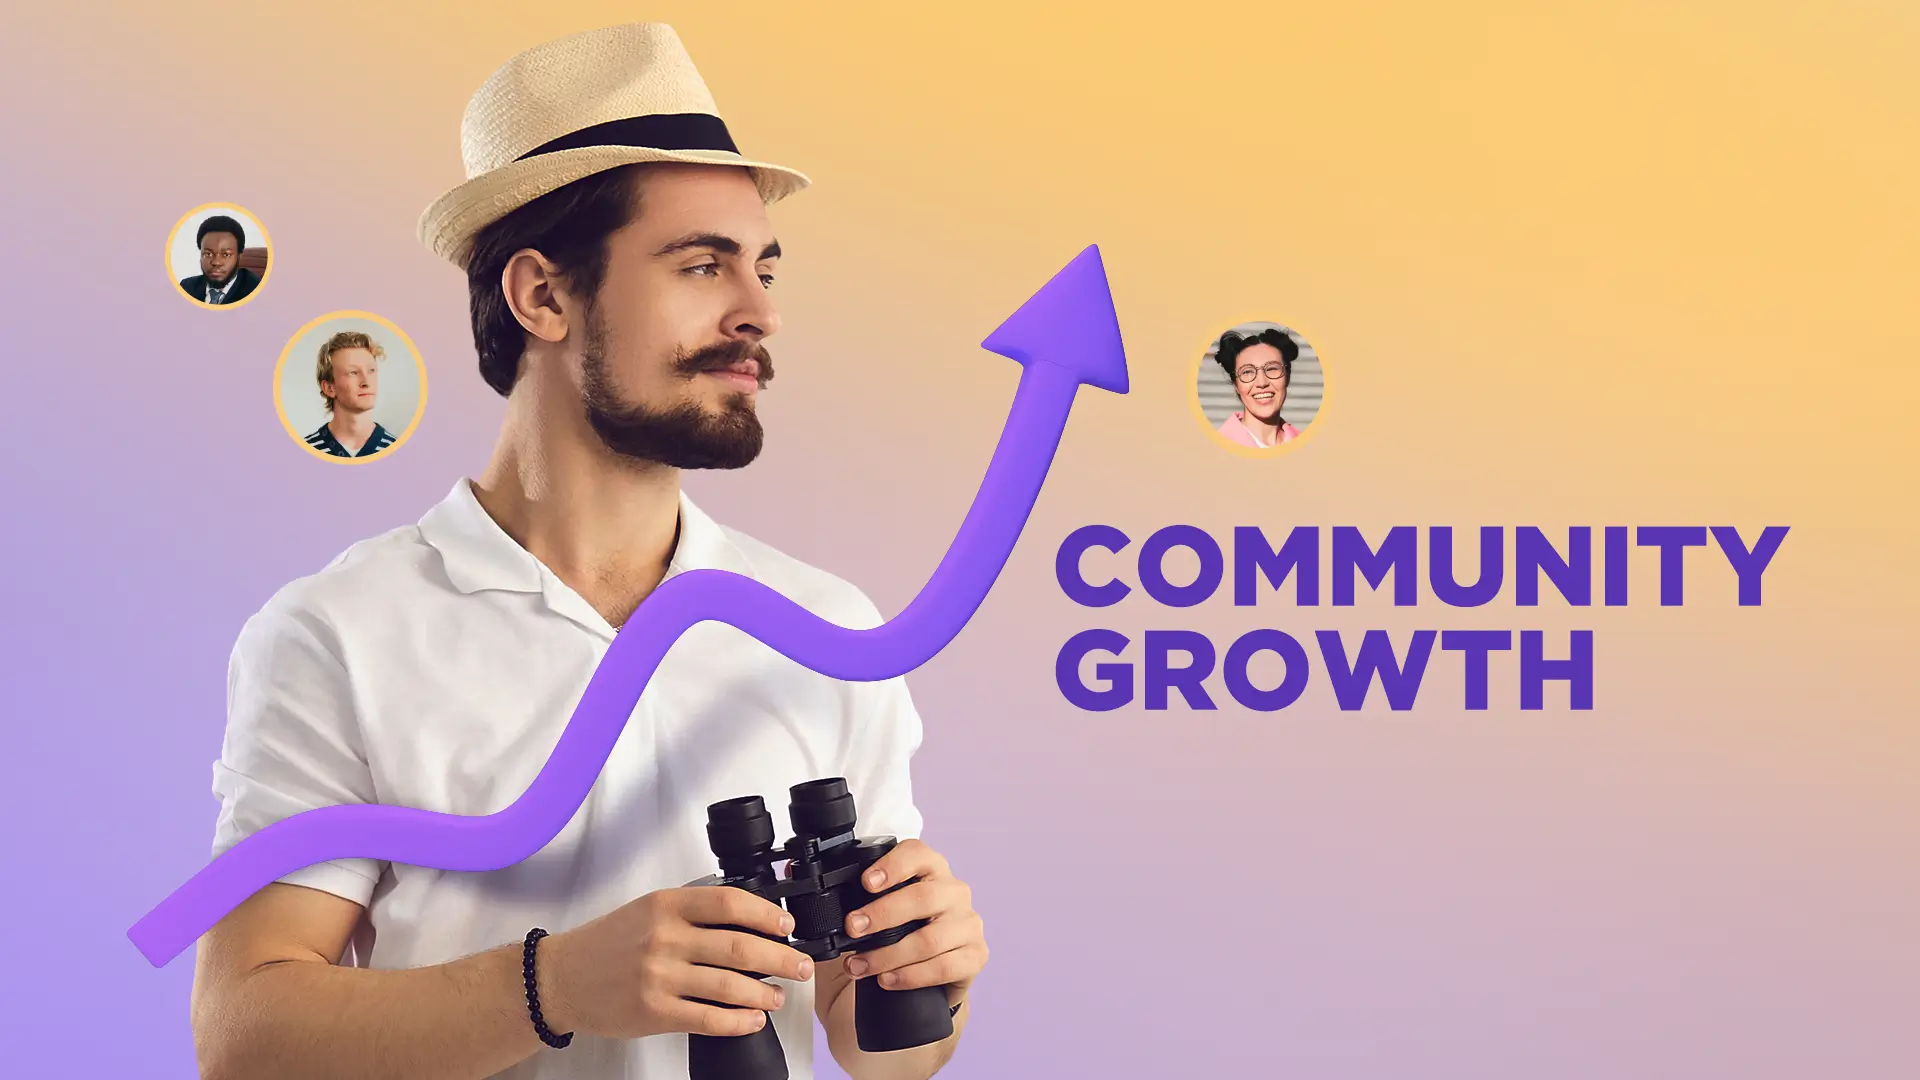 what are the advantages and disadvantages when a community grows